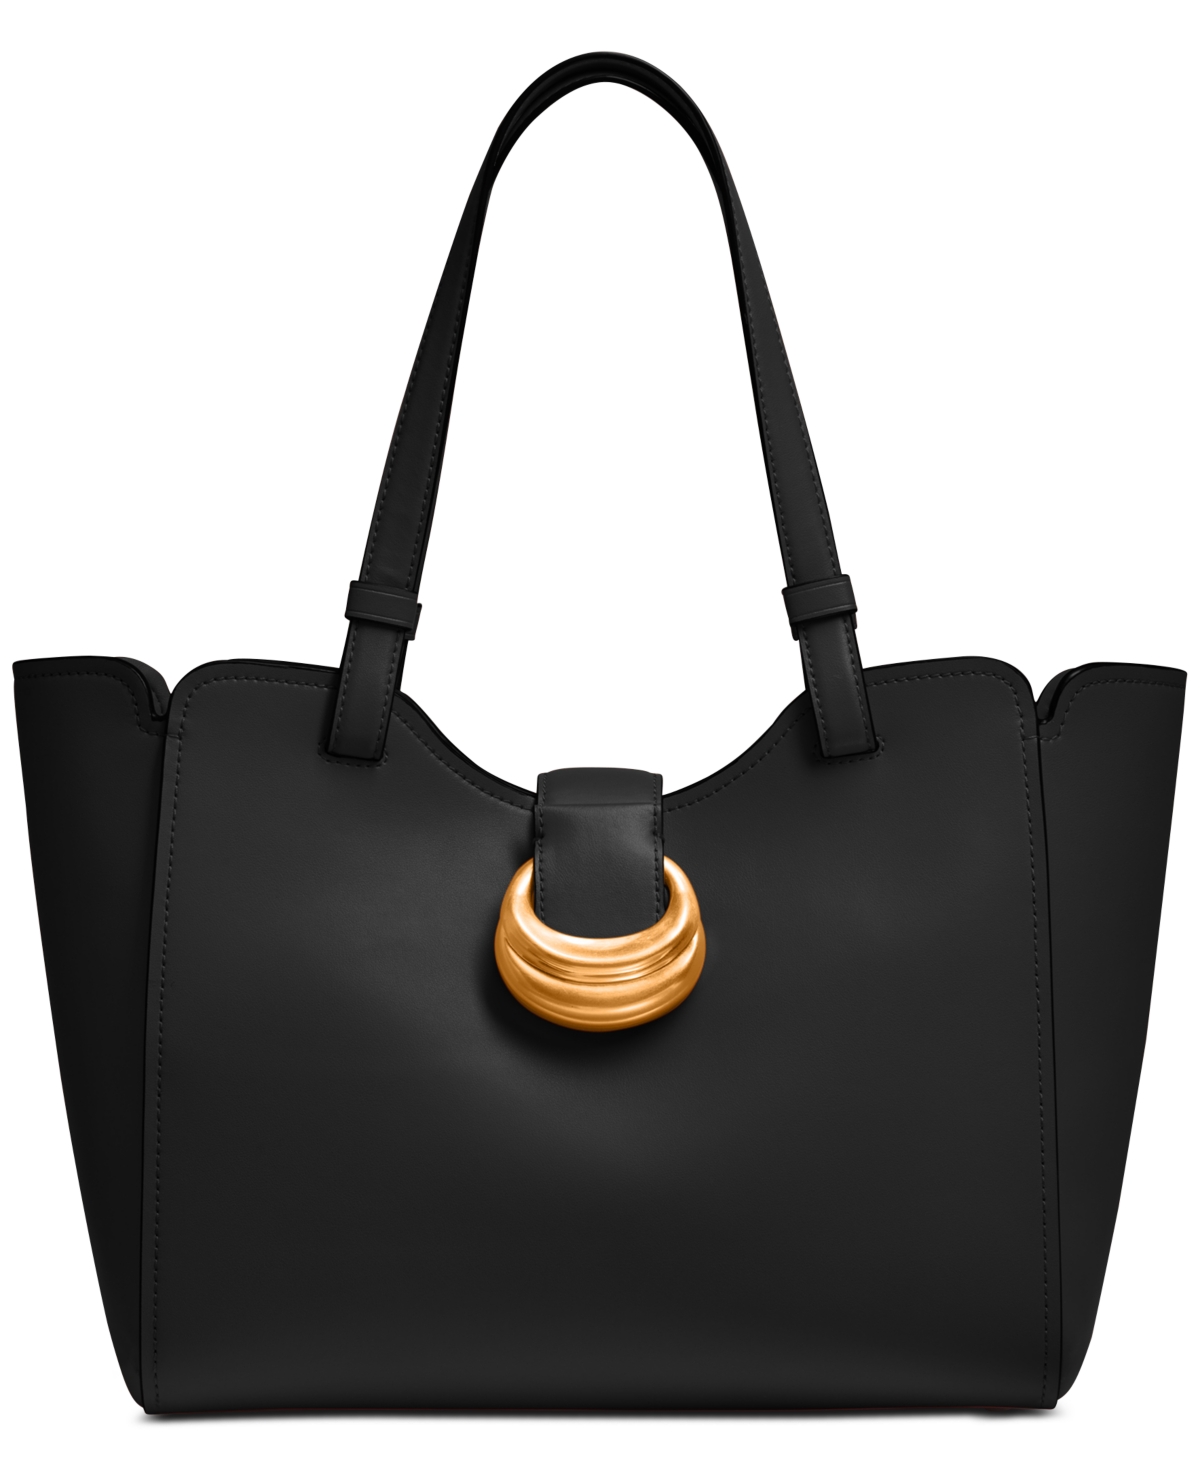 Valley Stream Small Buckle Tote - Black/gold